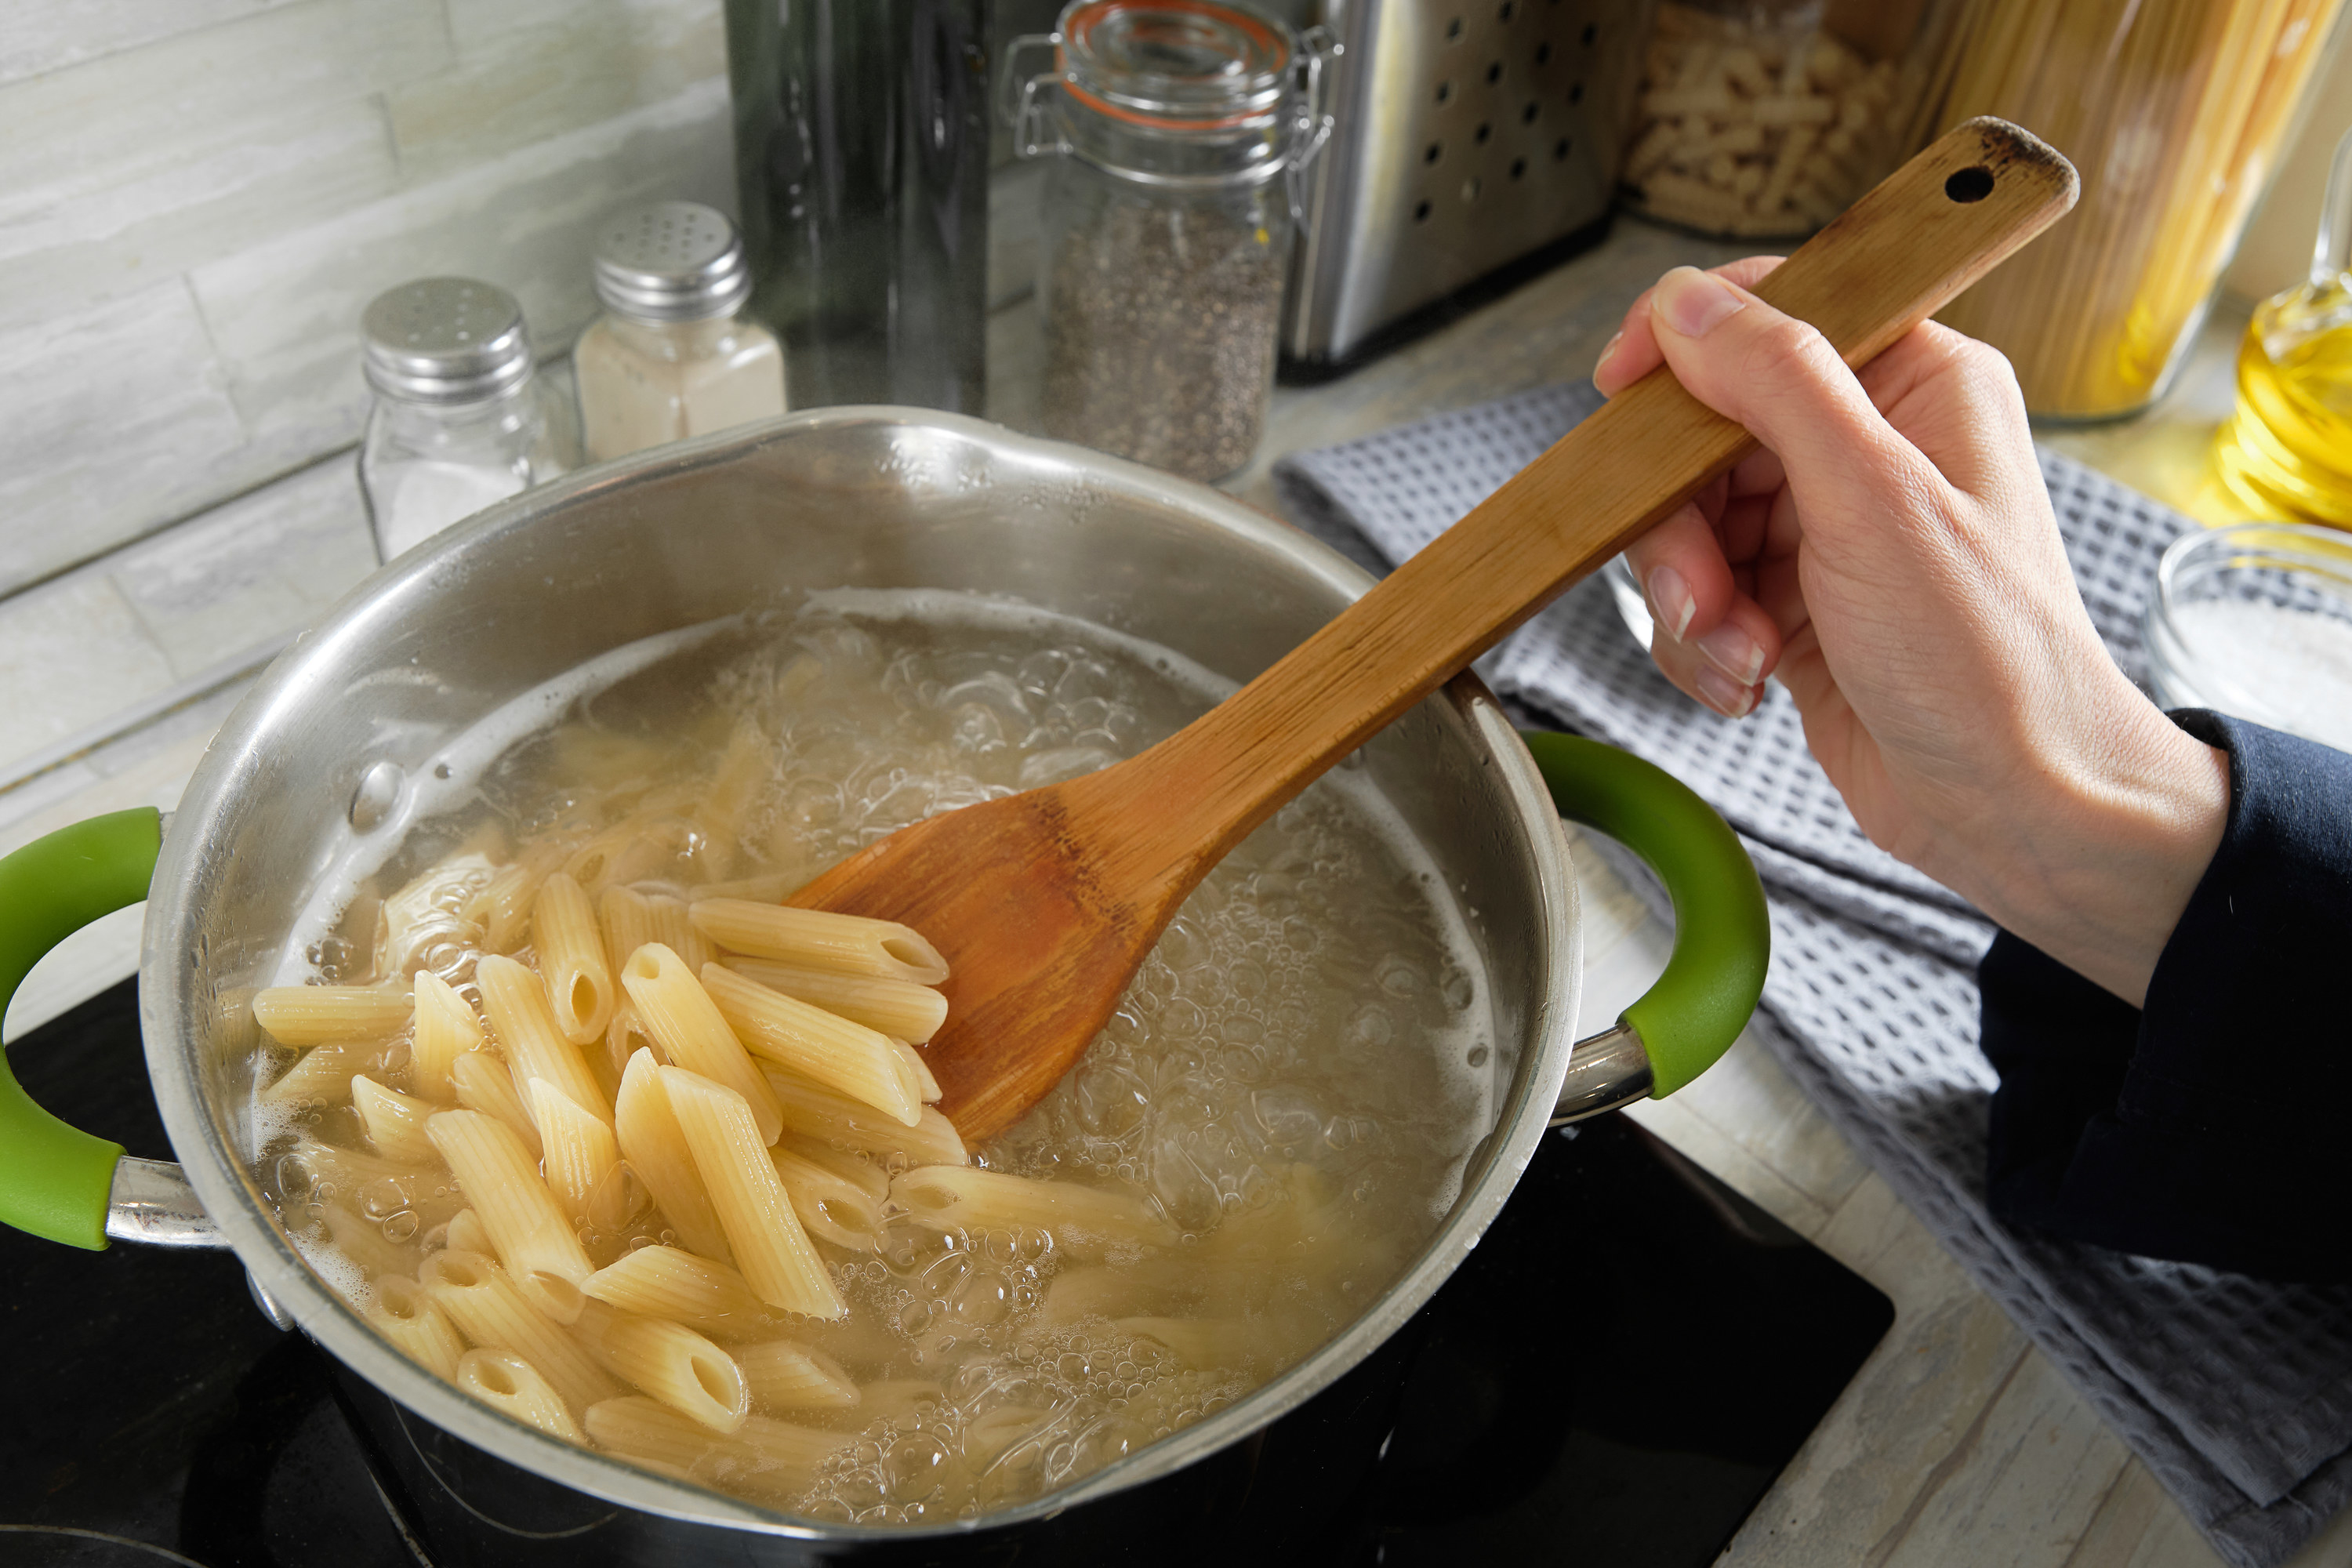 Pasta spoon stirring a bit of pasta in pot of boiling water